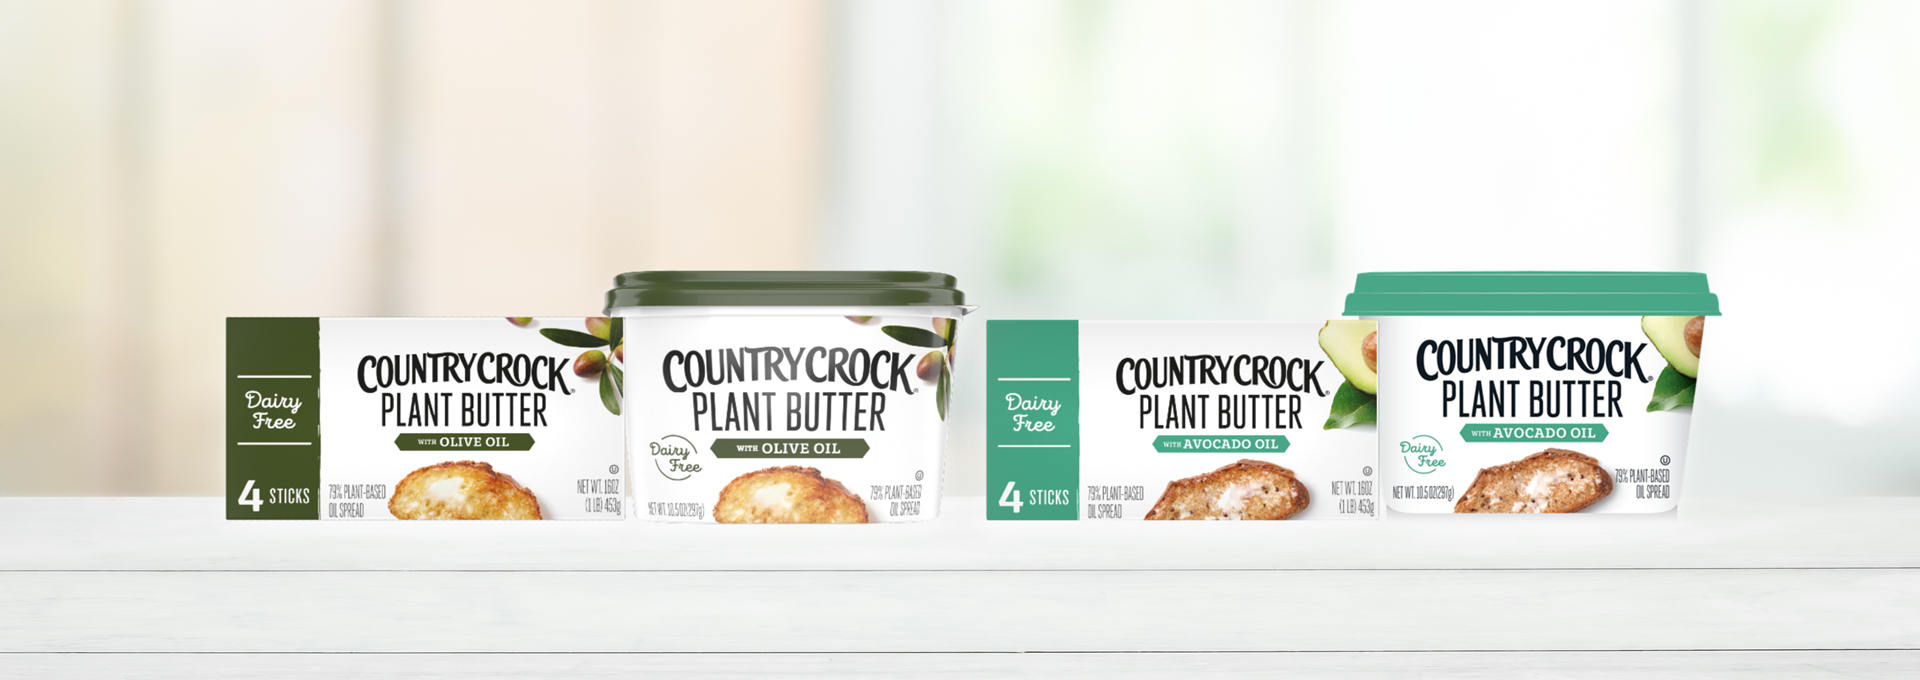 Product Page, Plant Butter | Country Crock